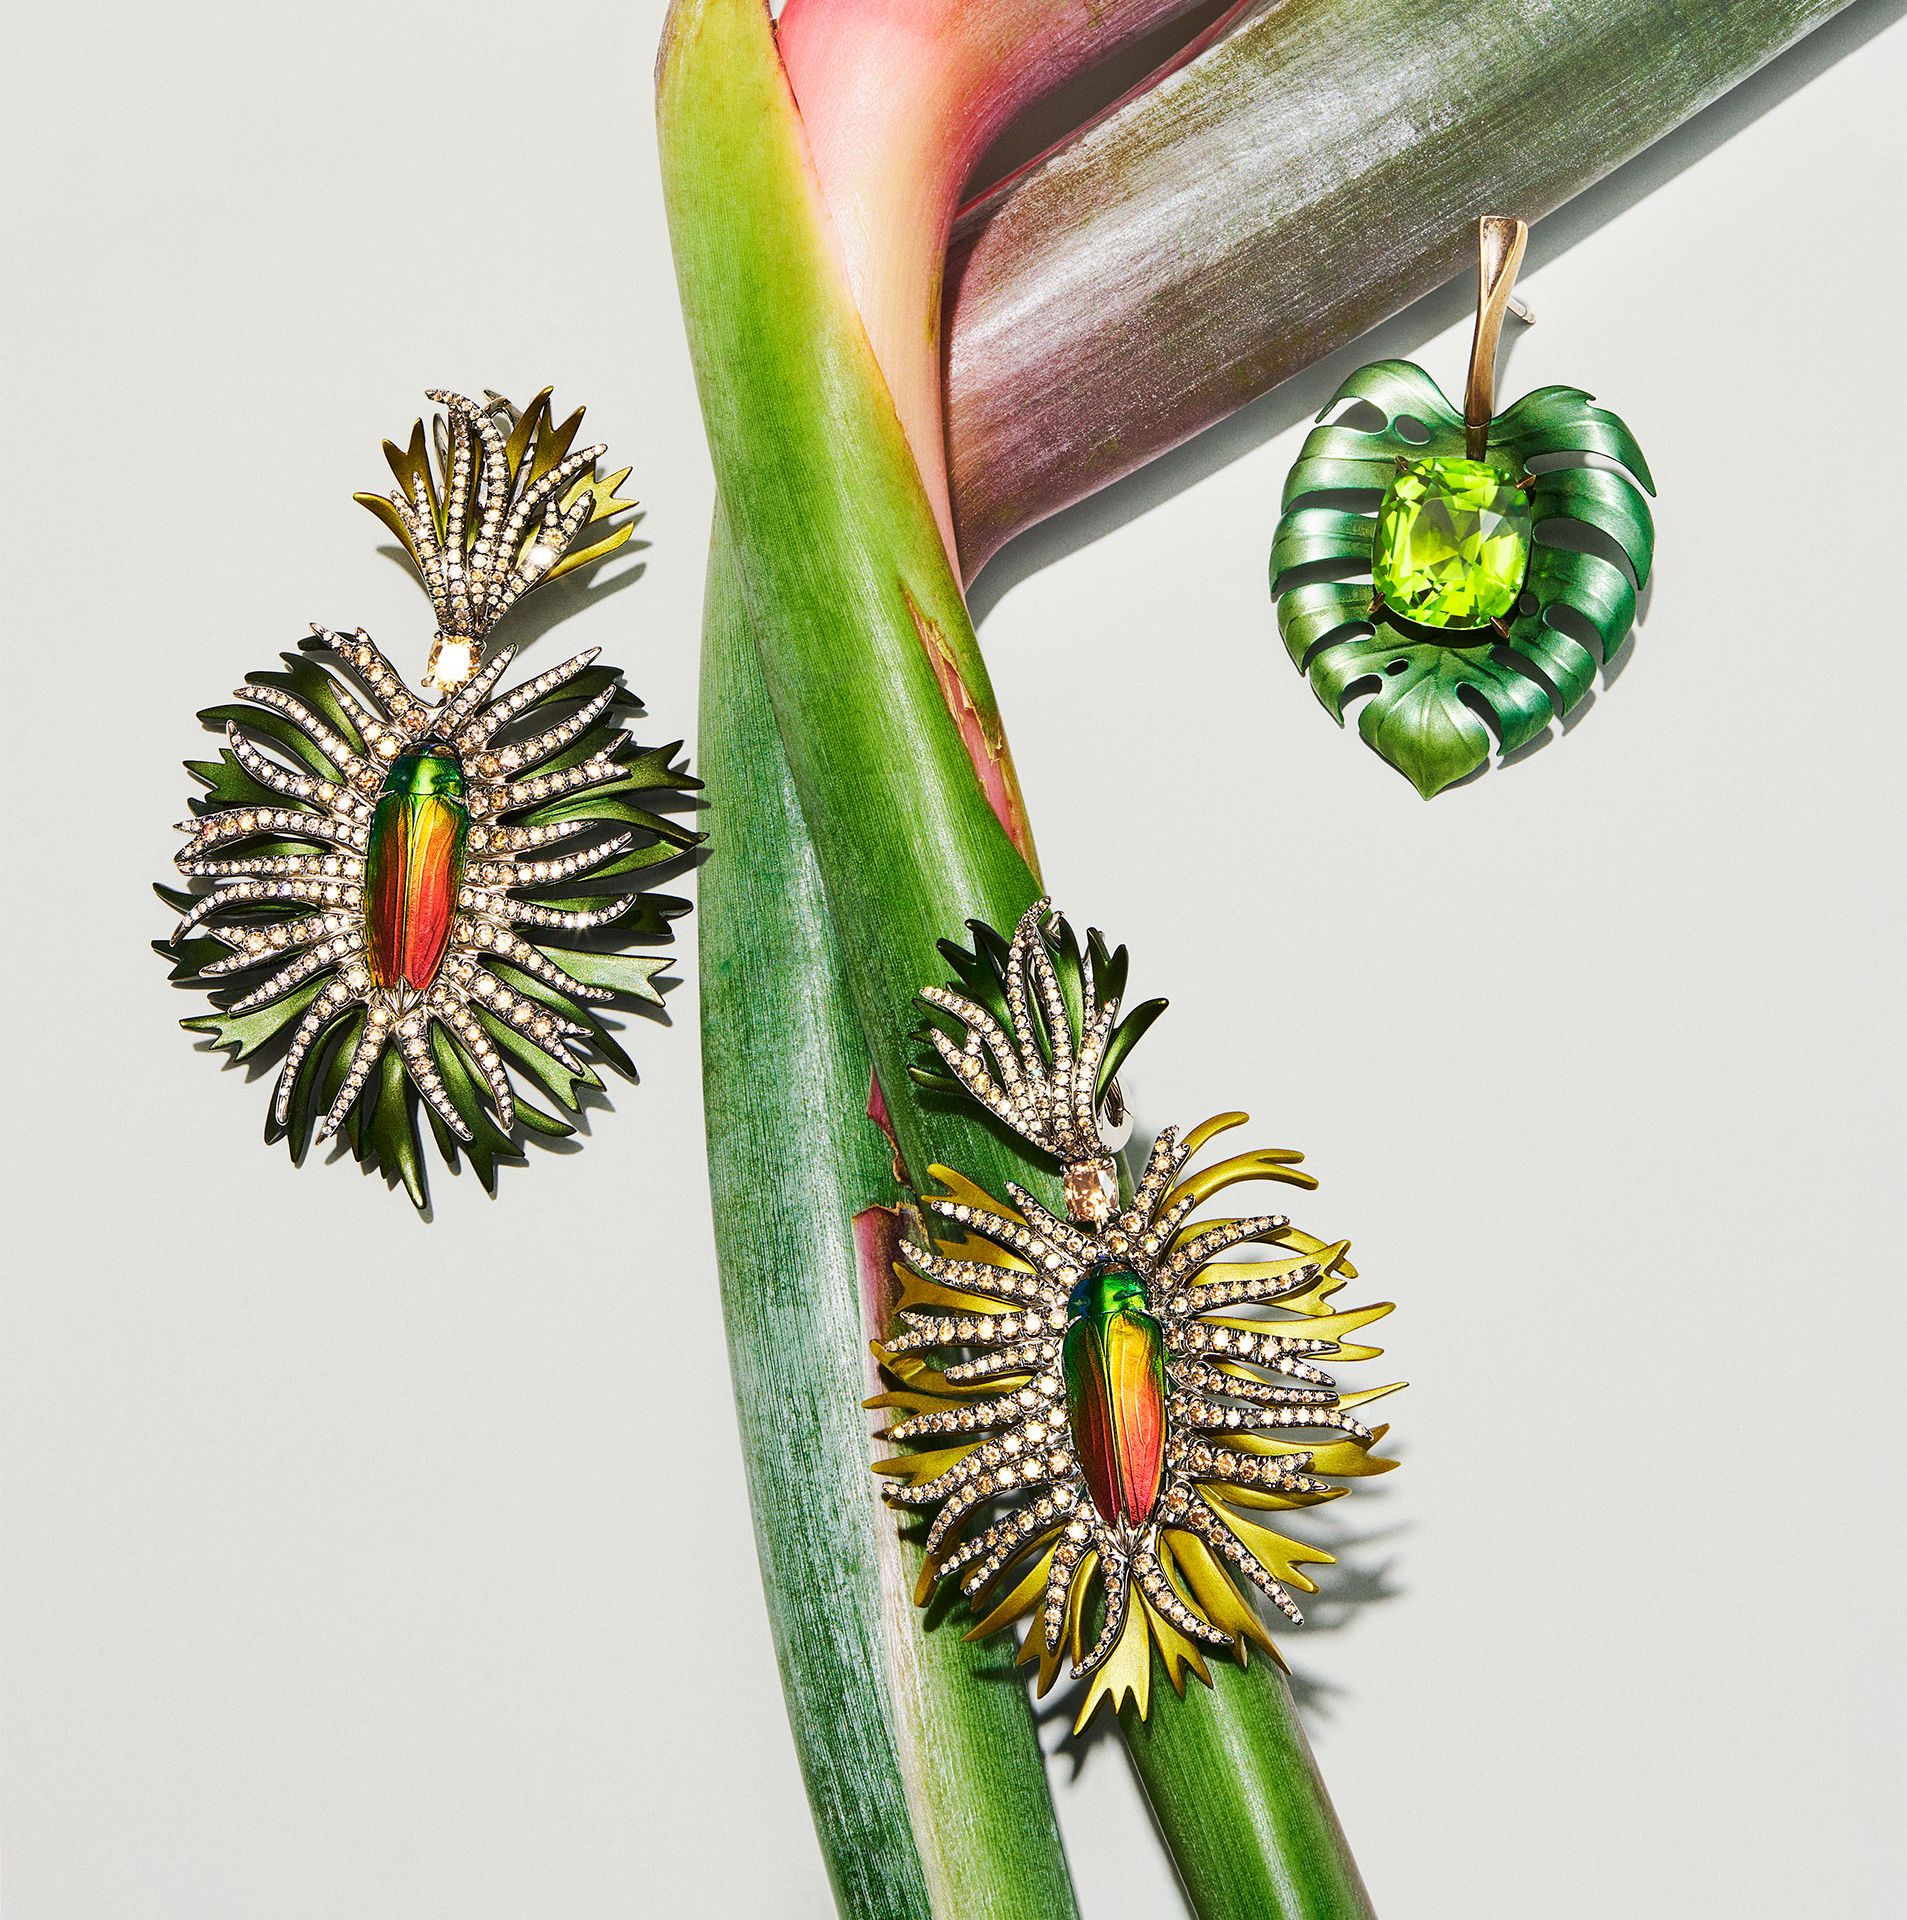 tourmaline earrings in aluminum, bronze, and white gold, and dianthus beetle drop earrings